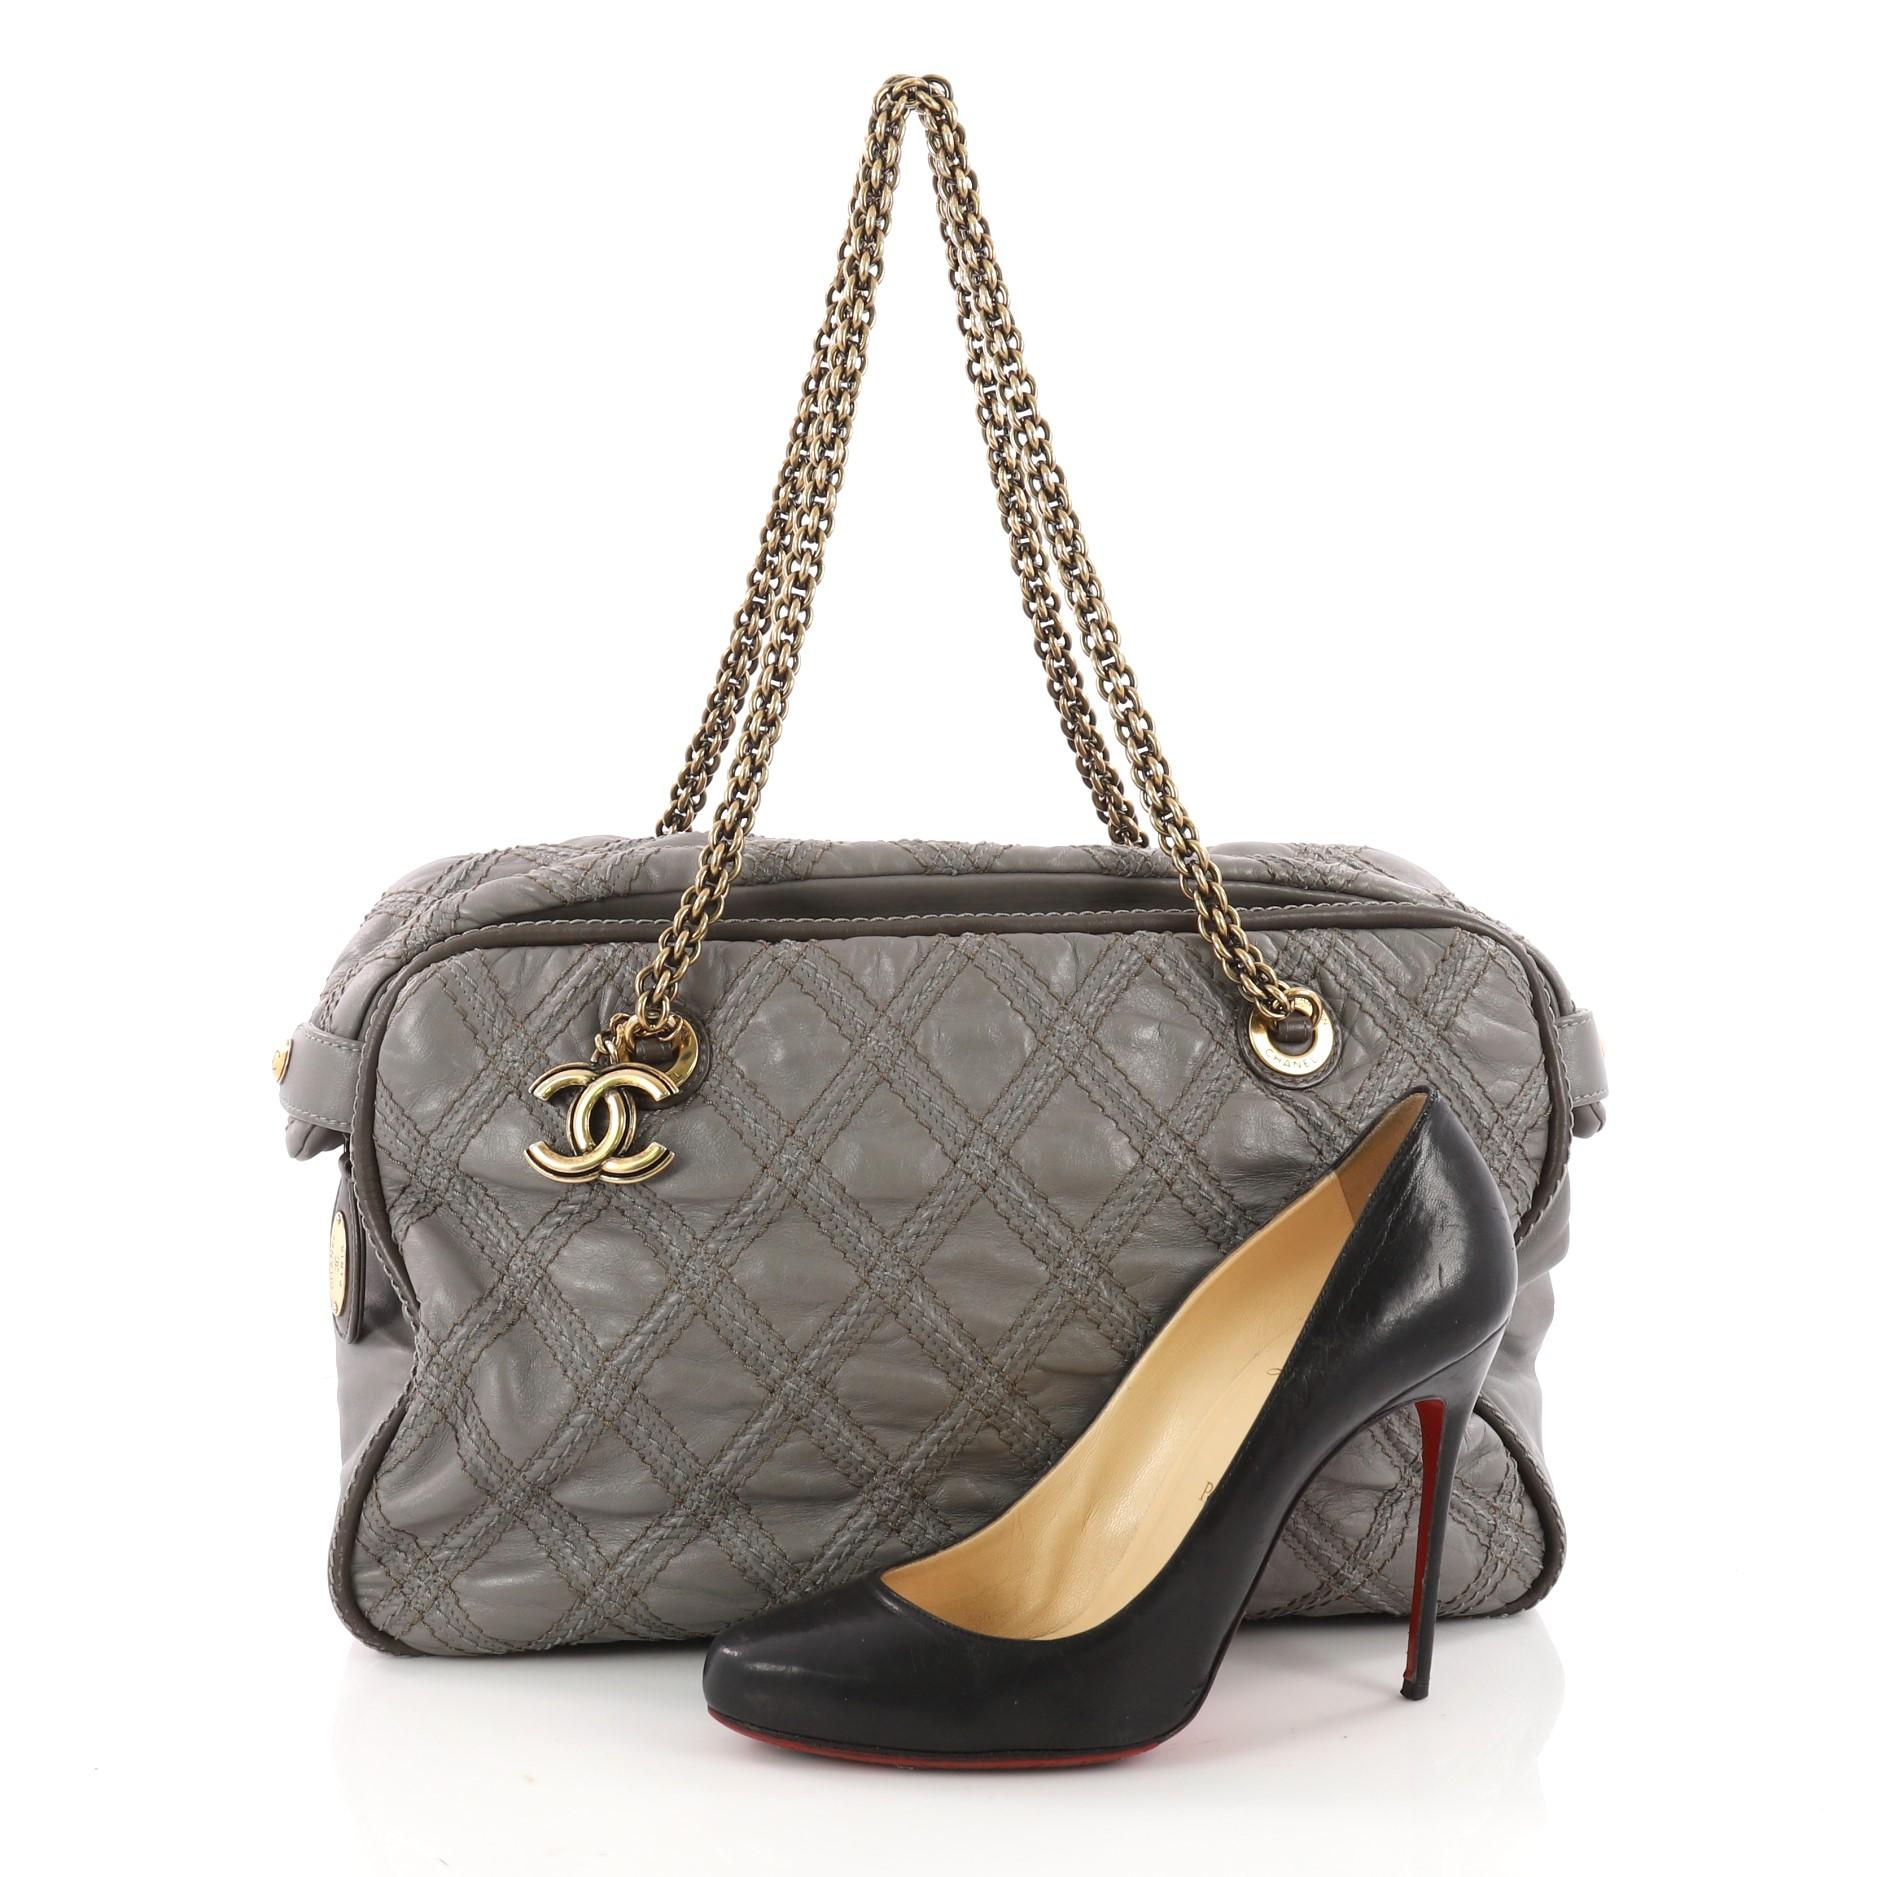 This authentic Chanel Triptych Tote Quilted Calfskin is sure to complement just about every casual outfit. Crafted from grey calfskin leather, this modern-style bag features triad diamond quilted stitching, Chanel reissue chain link straps, gray